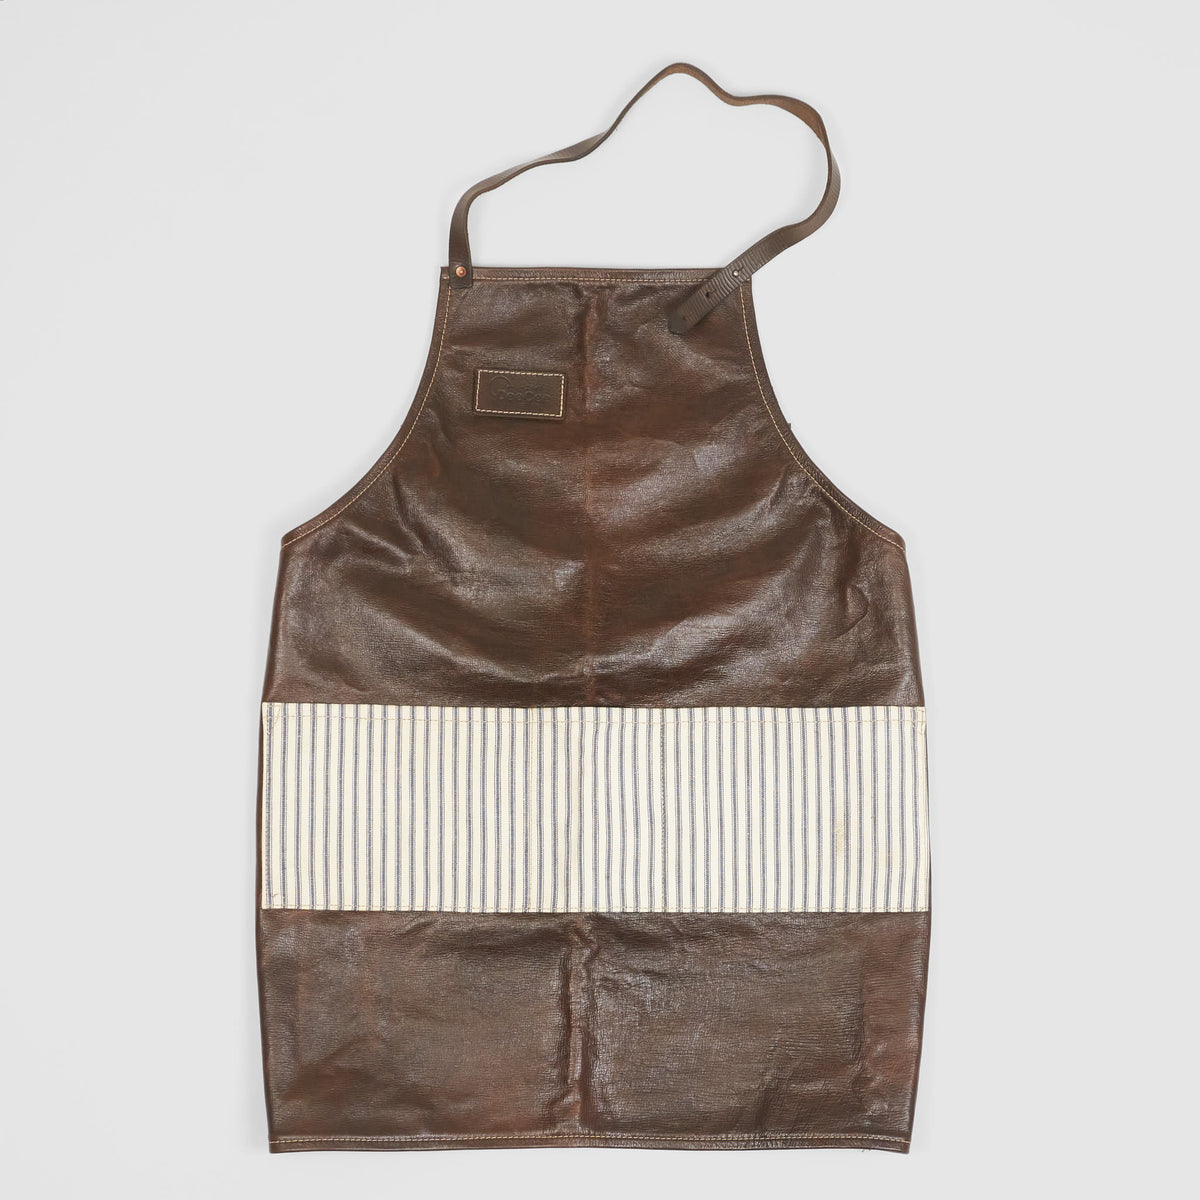 DeeCee style Leather Work Apron